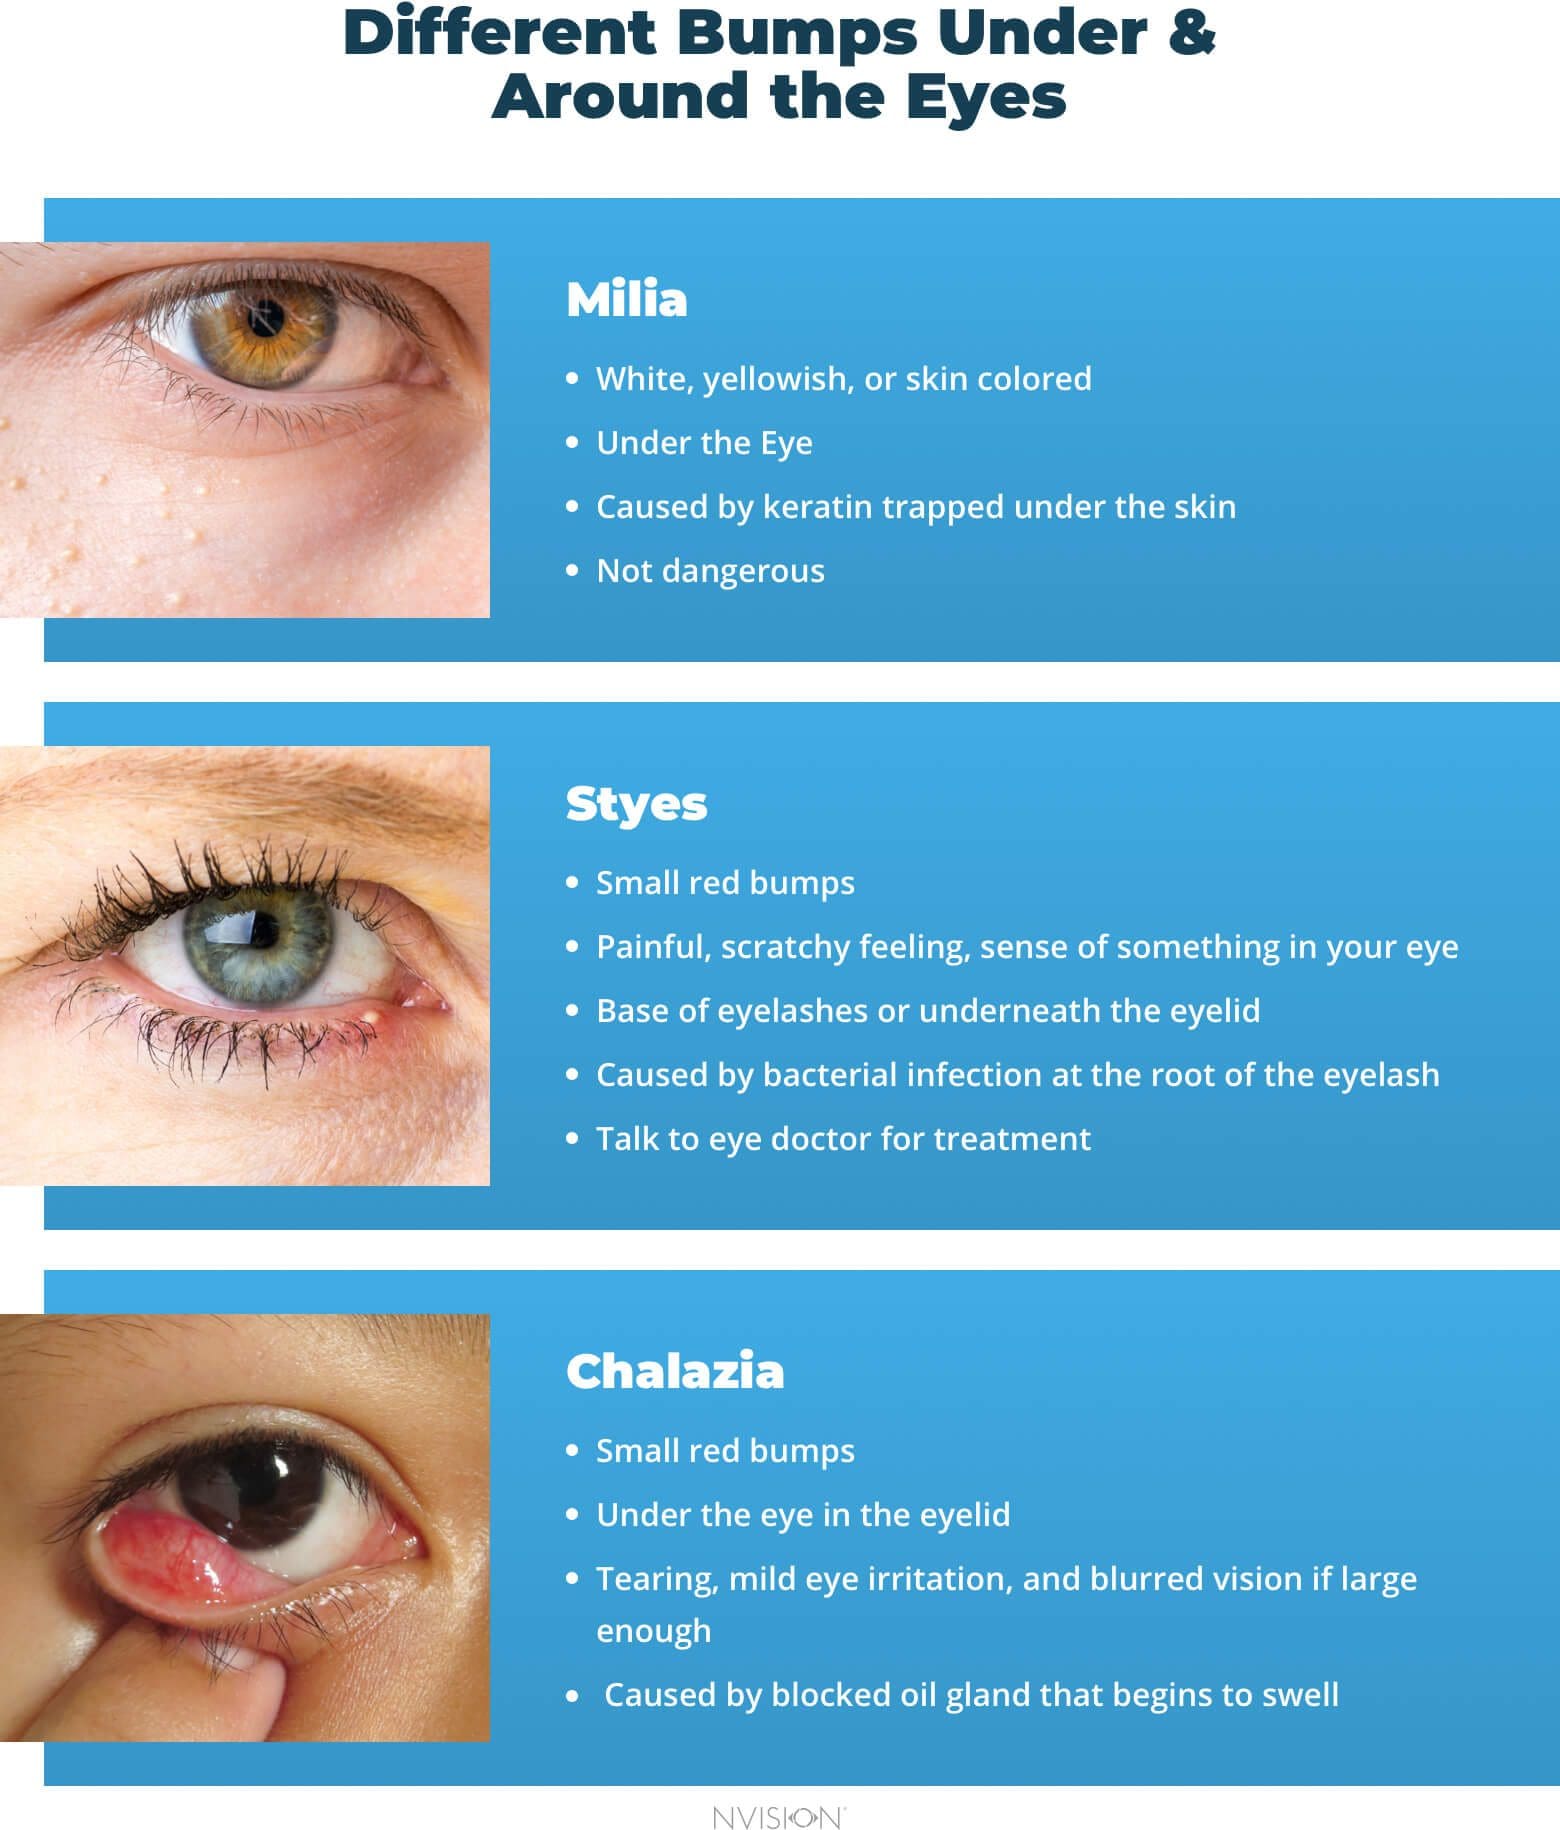 Bumps Under the Eyes: Types & How to Treat Them